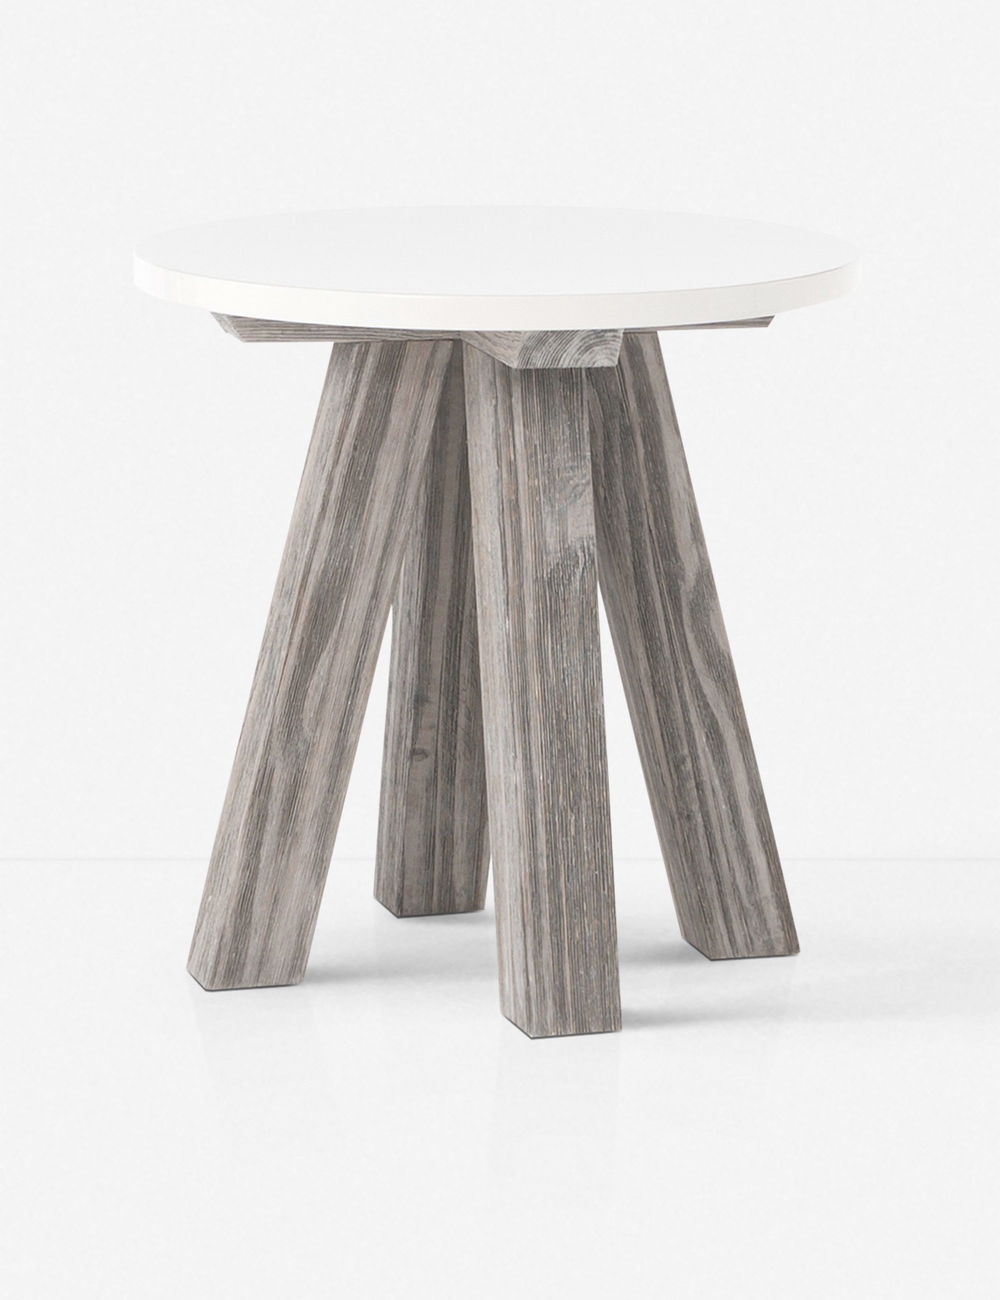 OXEN SIDE TABLE, WEATHERED PINE - Image 0